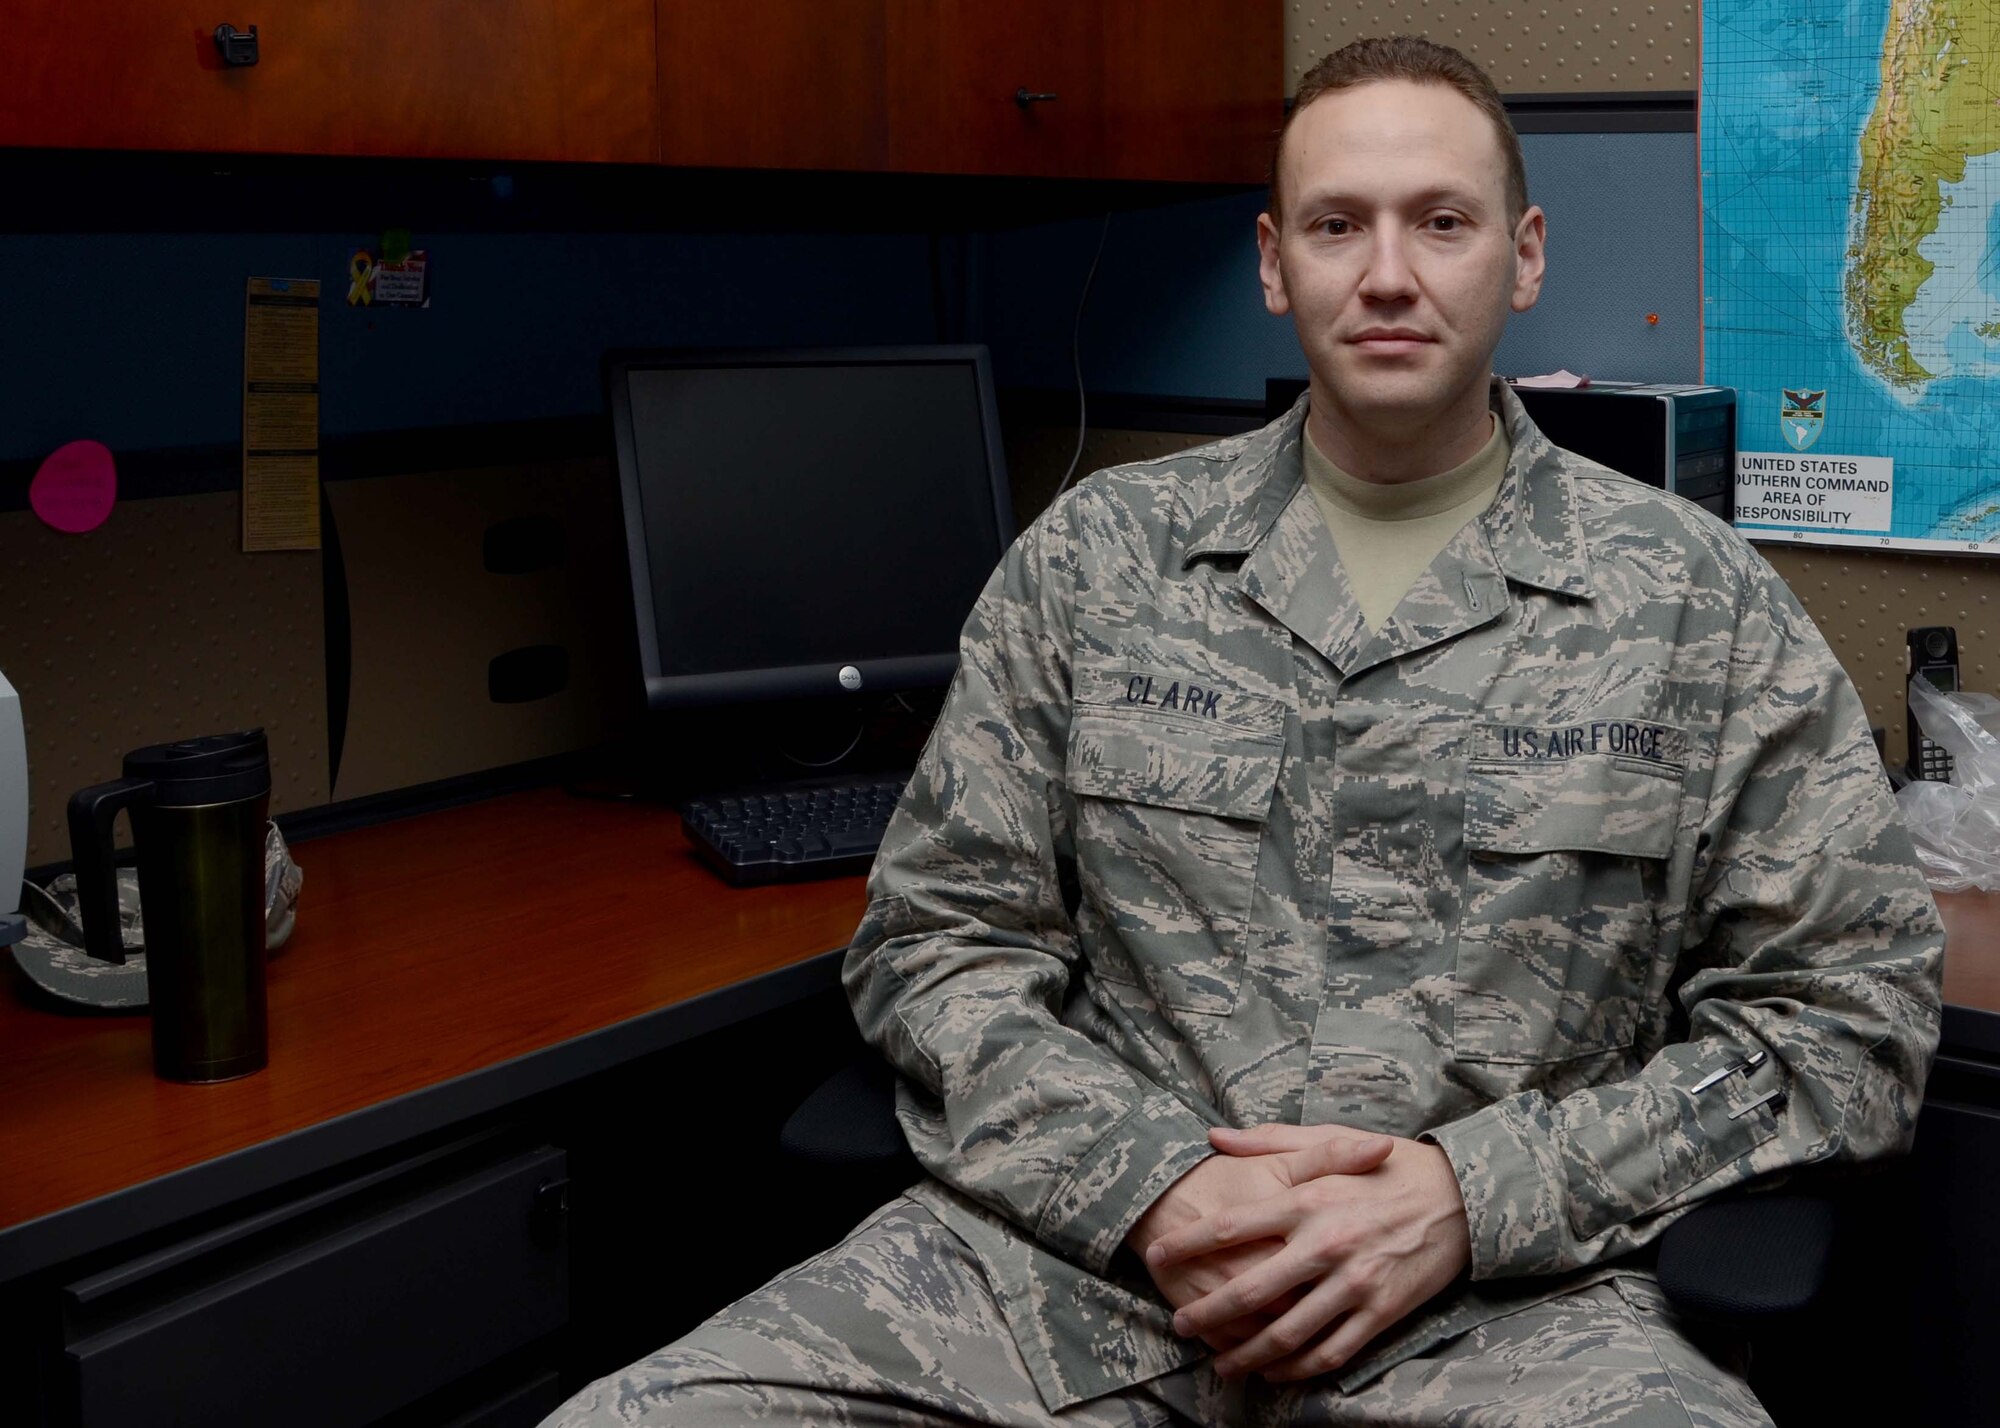 Master Sgt. Nathan Clark, Operations Superintendent assigned to the 612th Air Operations Center, talks about his role in the Sexual Assault Prevention and Response program during an interview on Davis-Monthan AFB, Ariz., Sept. 18, 2013. (U.S. Air Force photo by Staff Sgt. Heather R. Redman/Released)